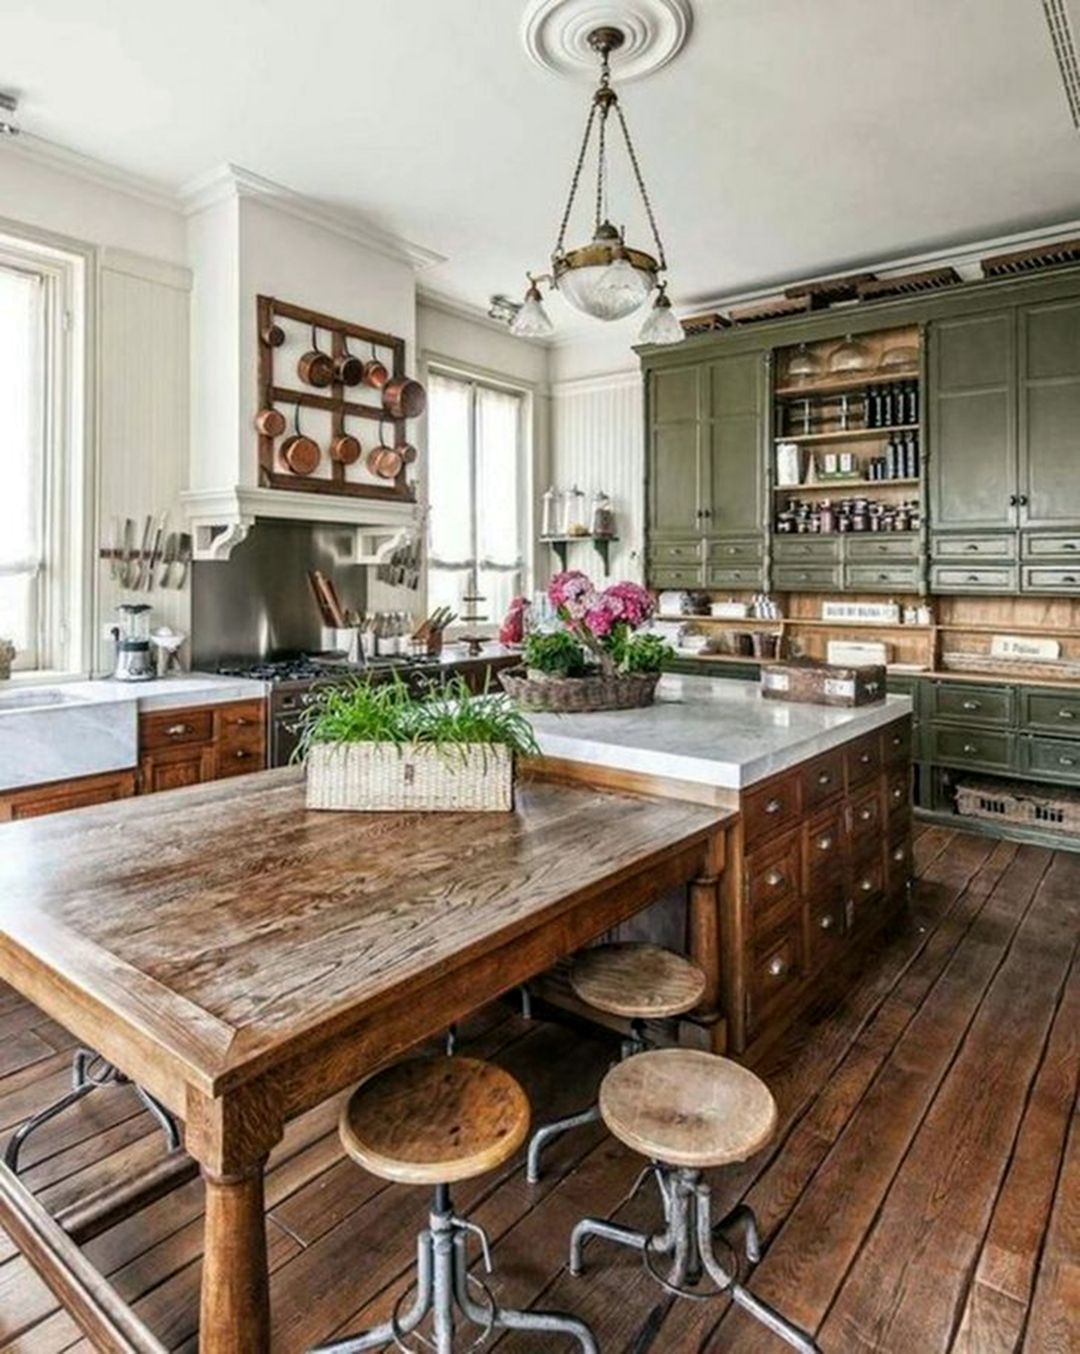 Inspiring Rustic Country Kitchen